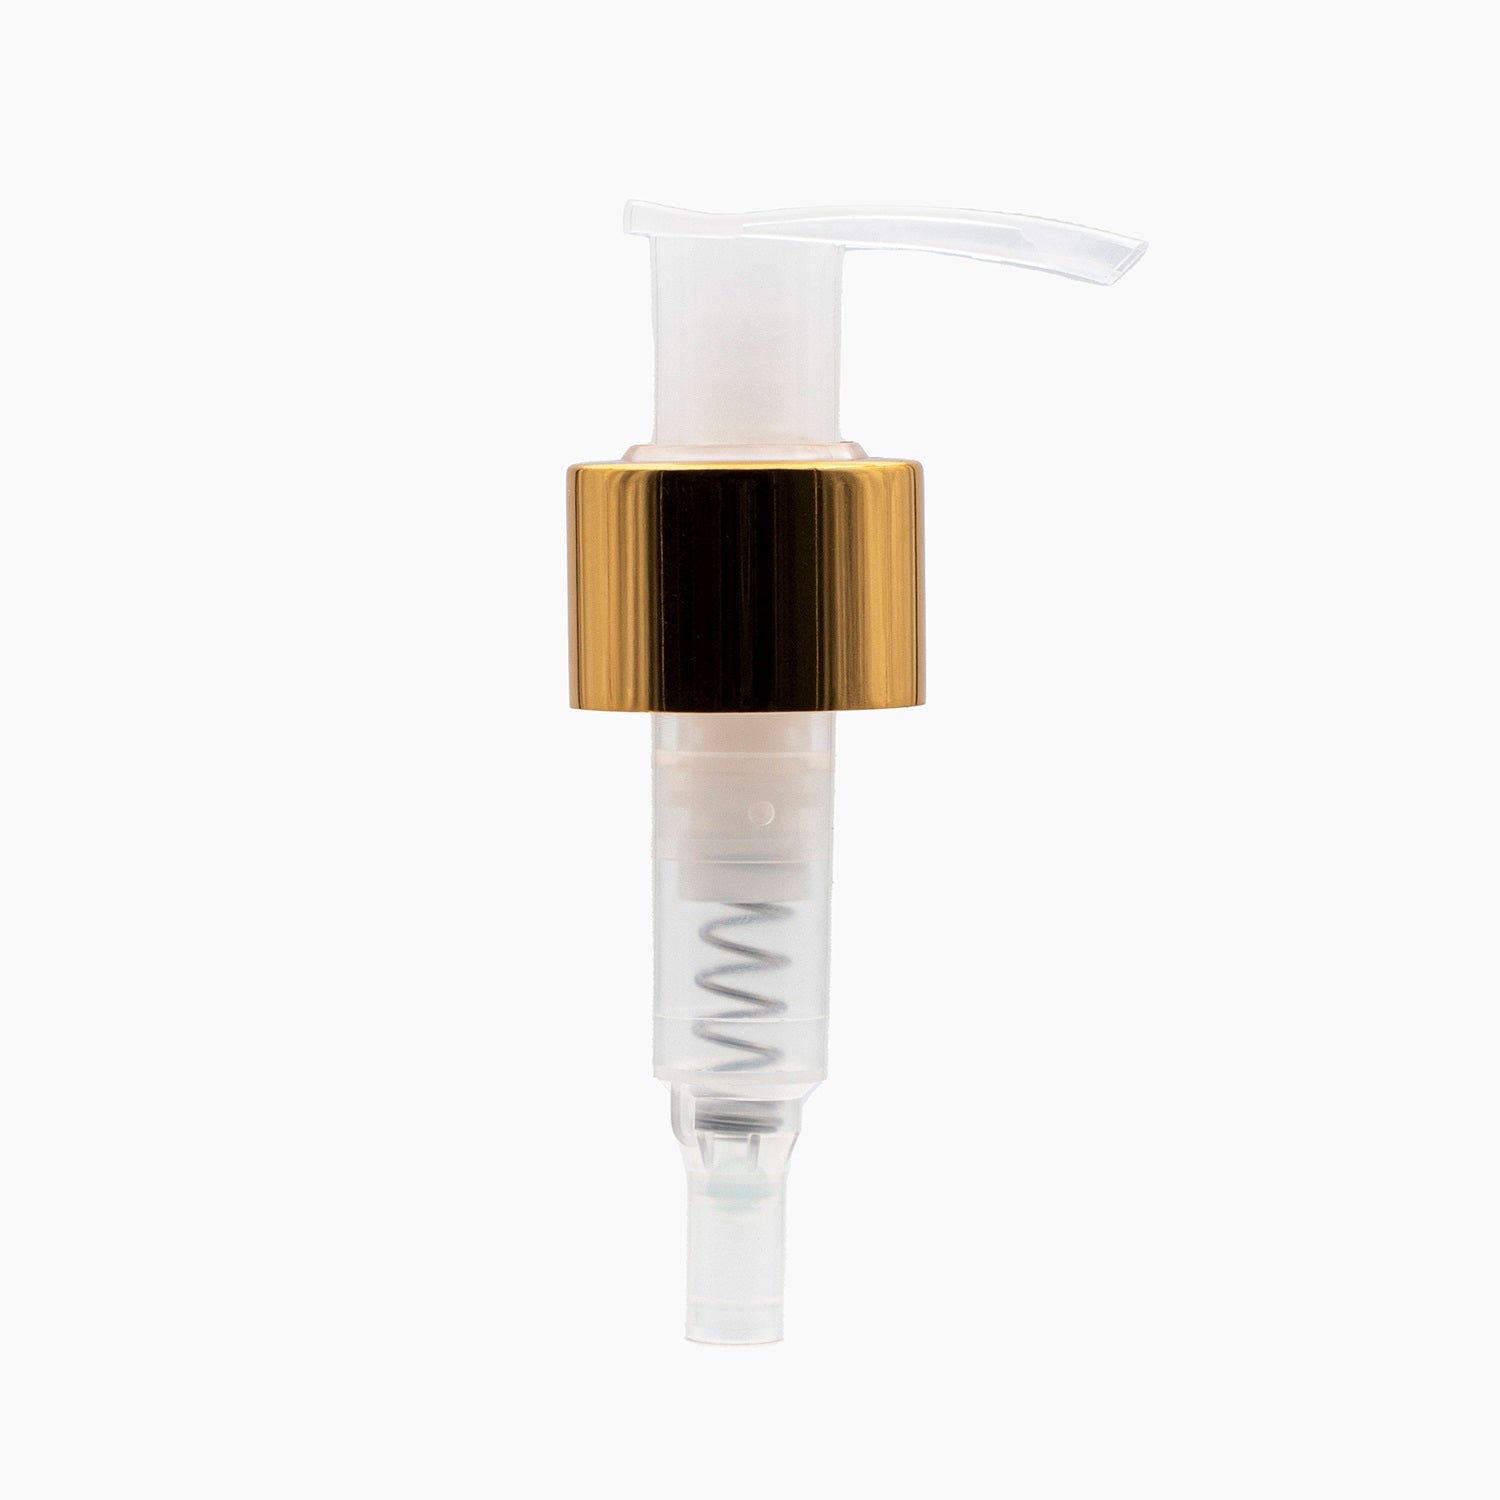 Gold Collar Natural 24mm Plastic Lotion Pump Cap On White Background | Brightpack Closures And Accessories